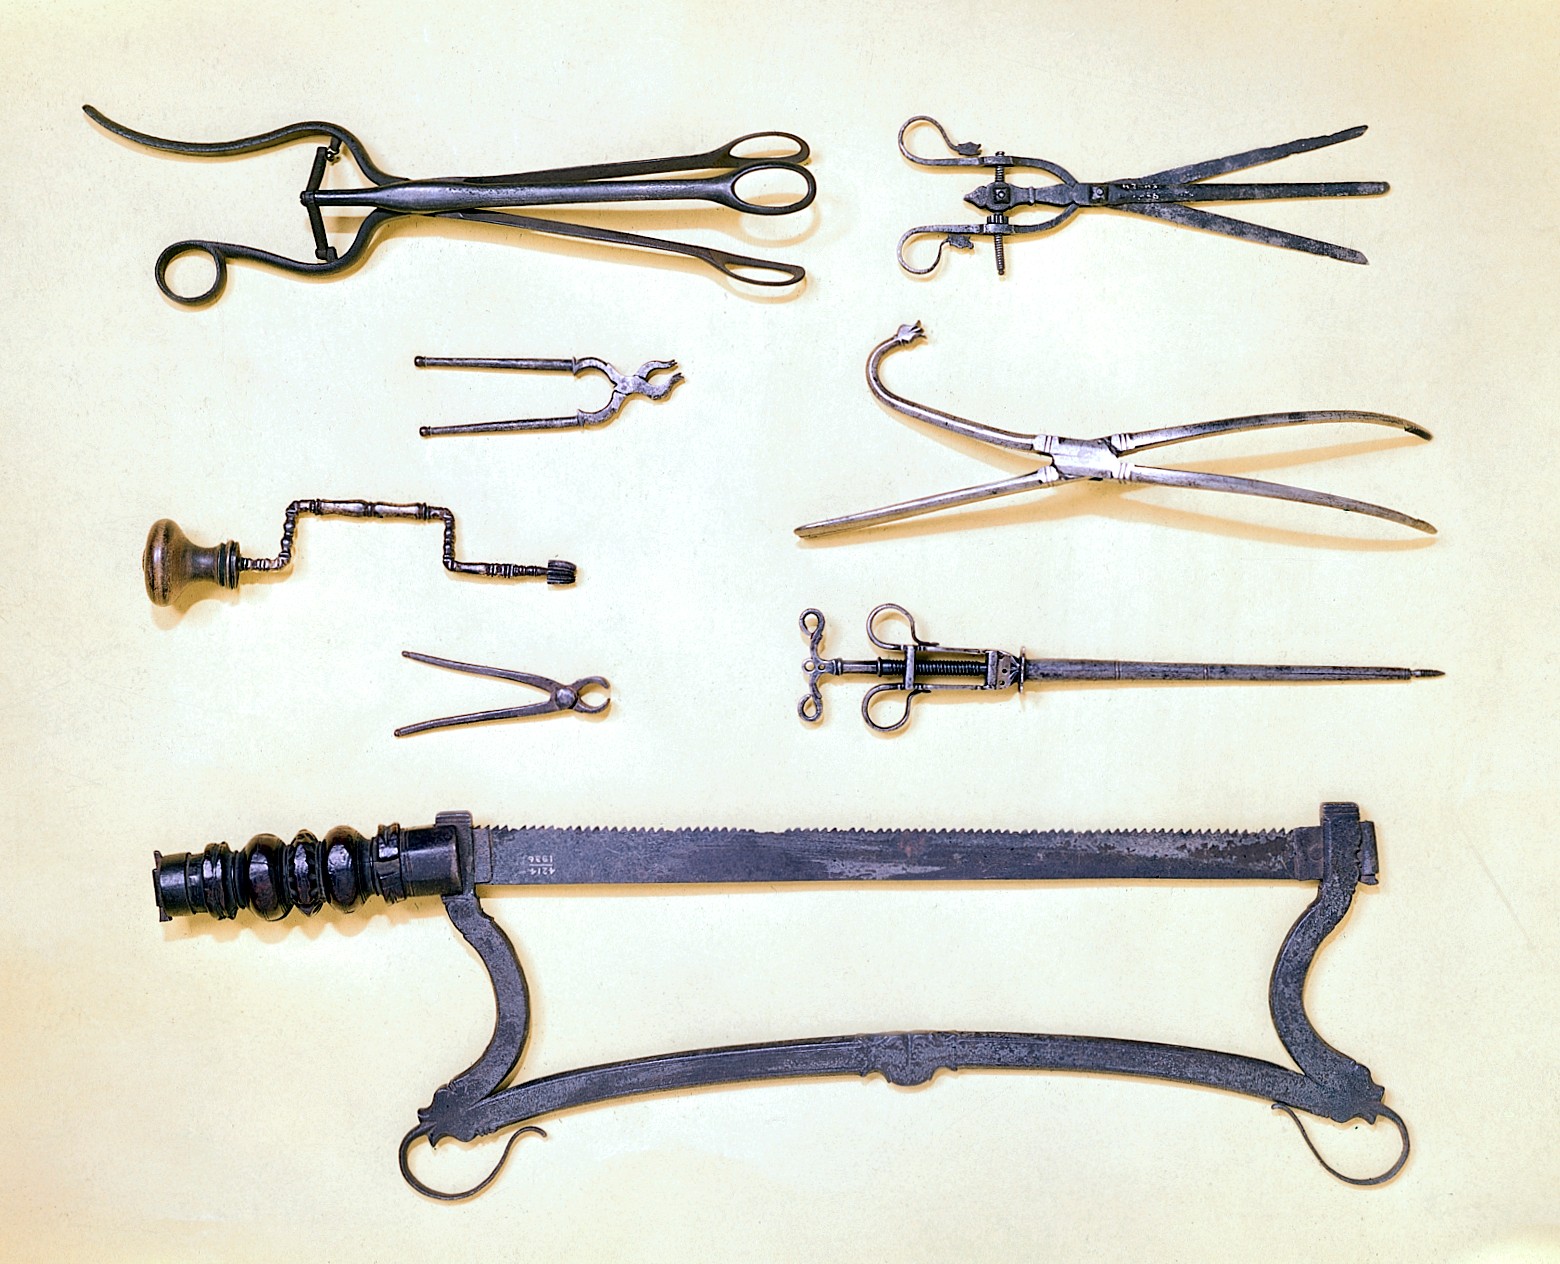 181916 Surgical instruments of the 16th and 17th centuries Wellcome L0012386